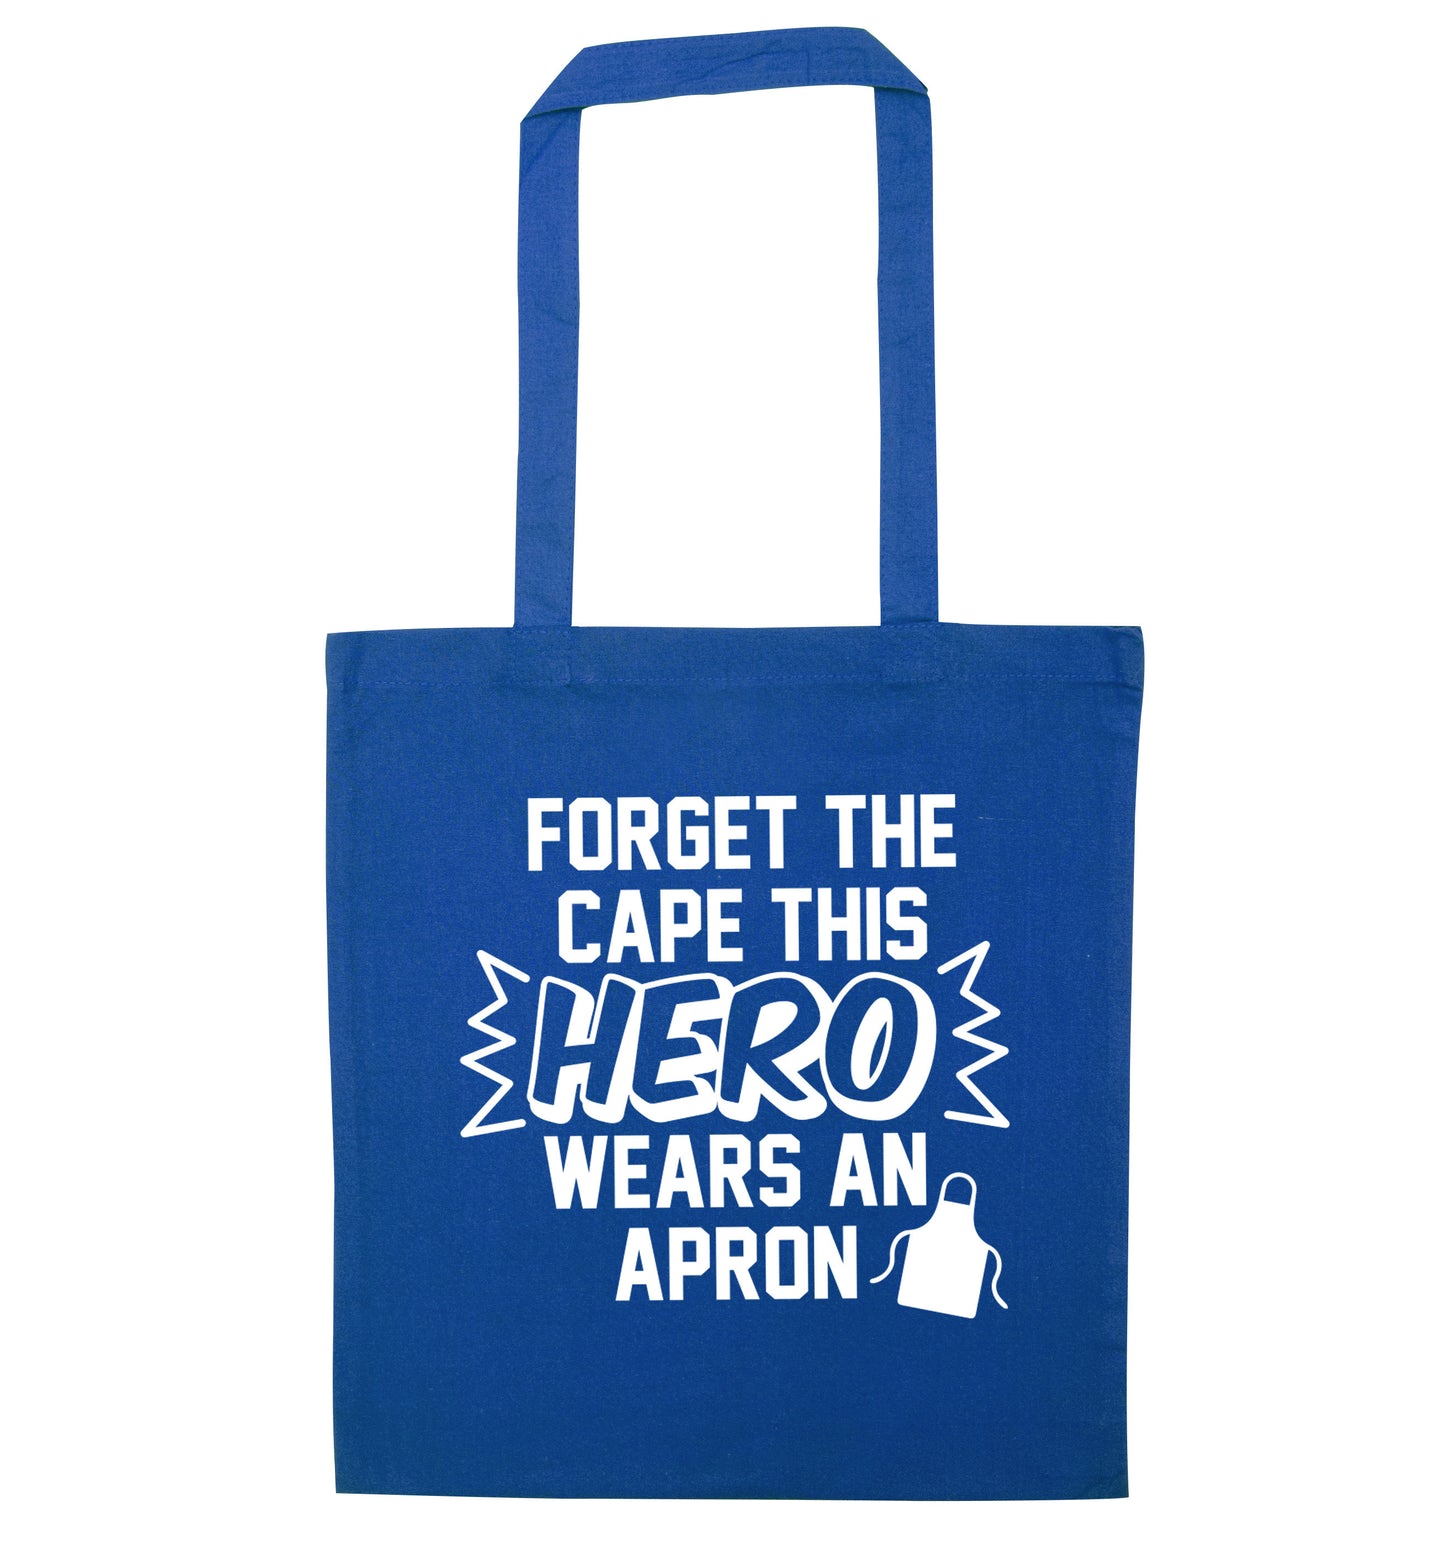 Forget the cape this hero wears an apron blue tote bag